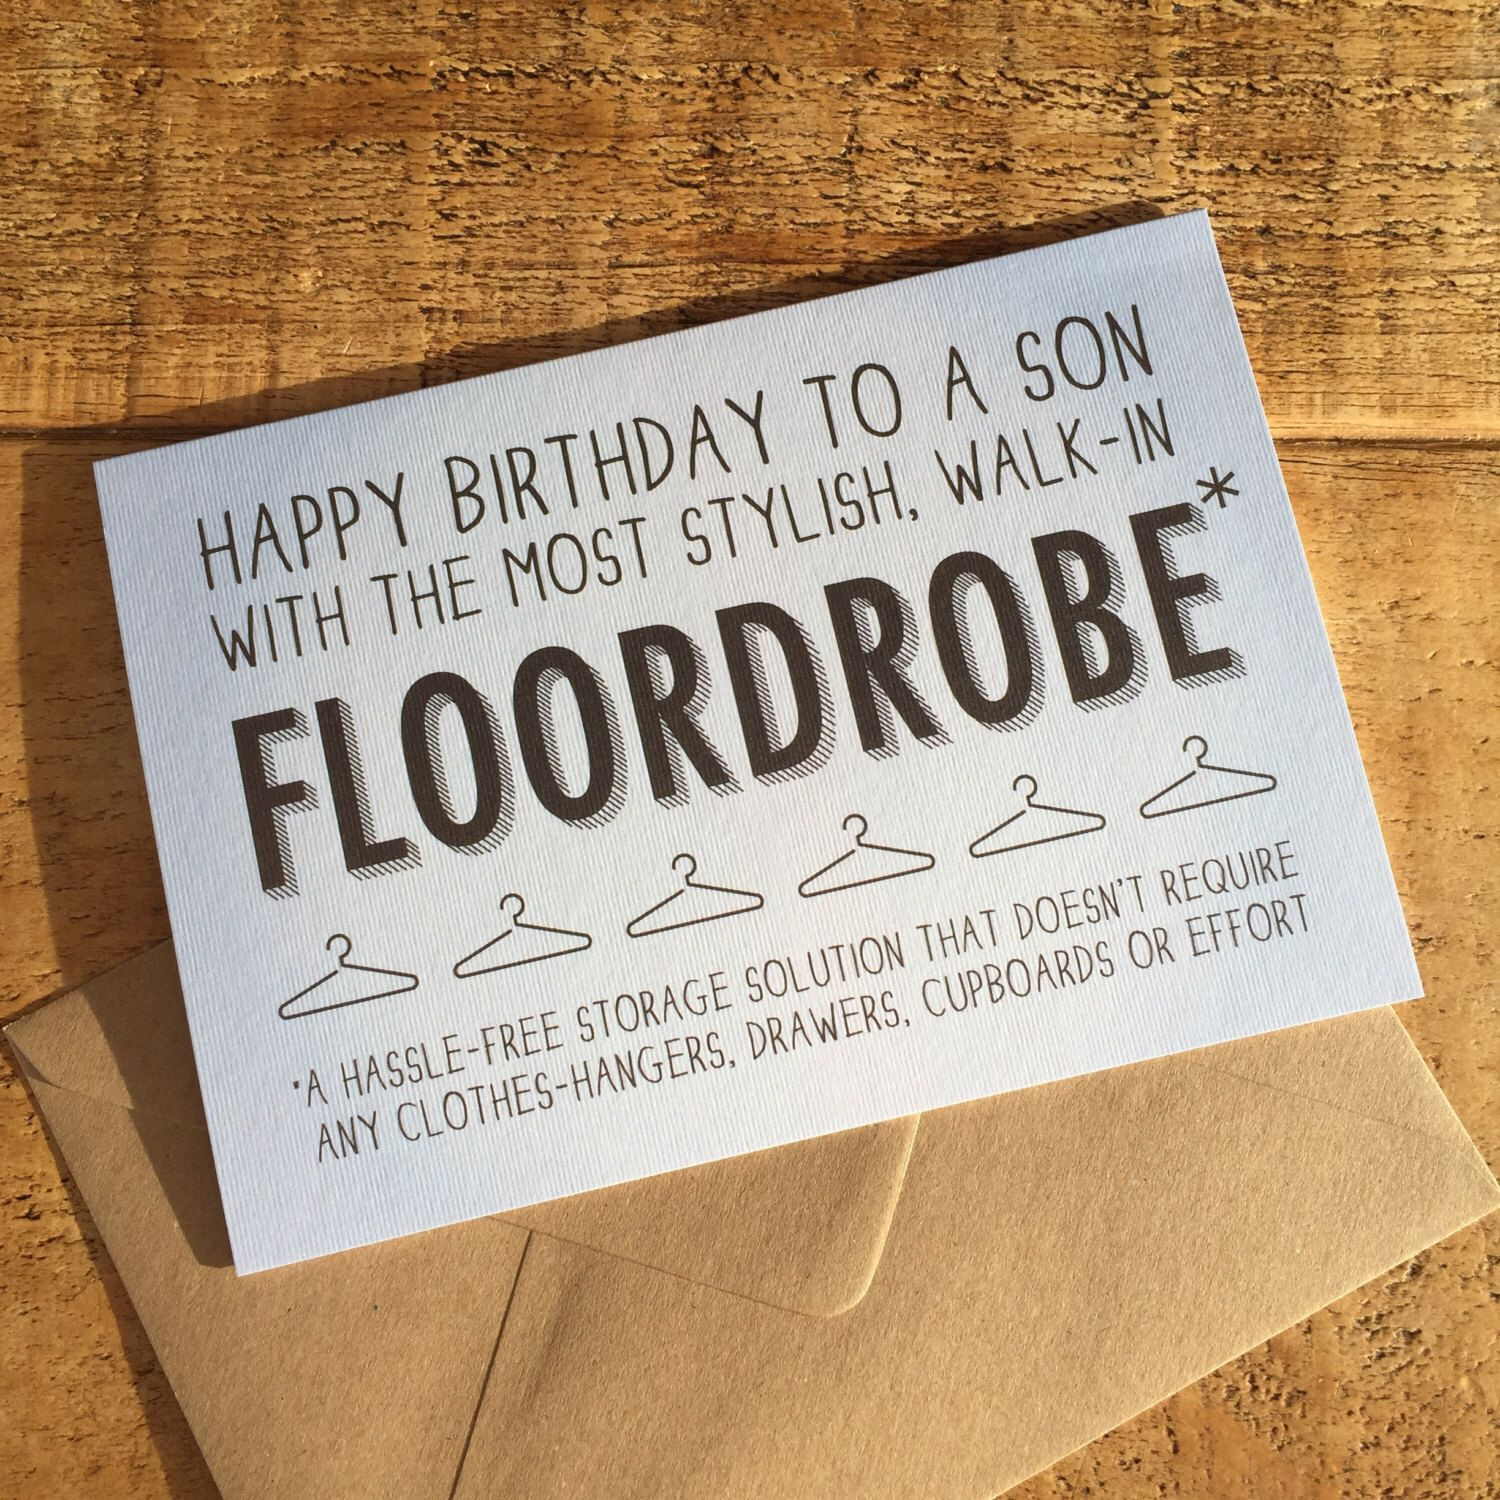 Funny Birthday Cards For Son
 Funny Son Birthday Card For a son who has a stylish walk